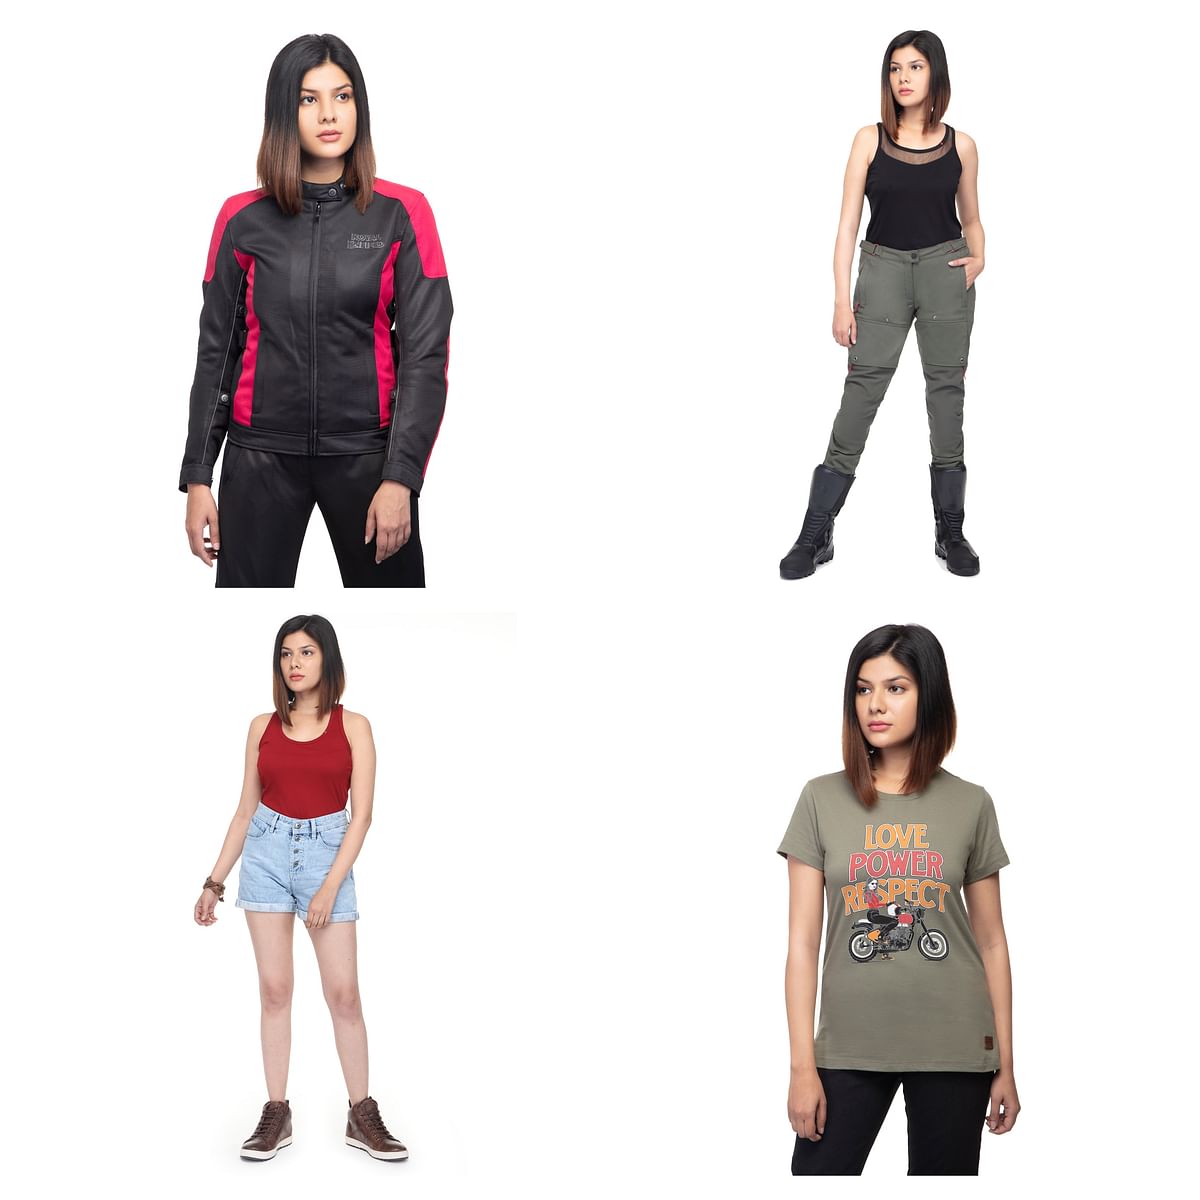 Some of the products from Royal Enfield's Apparel for women collection